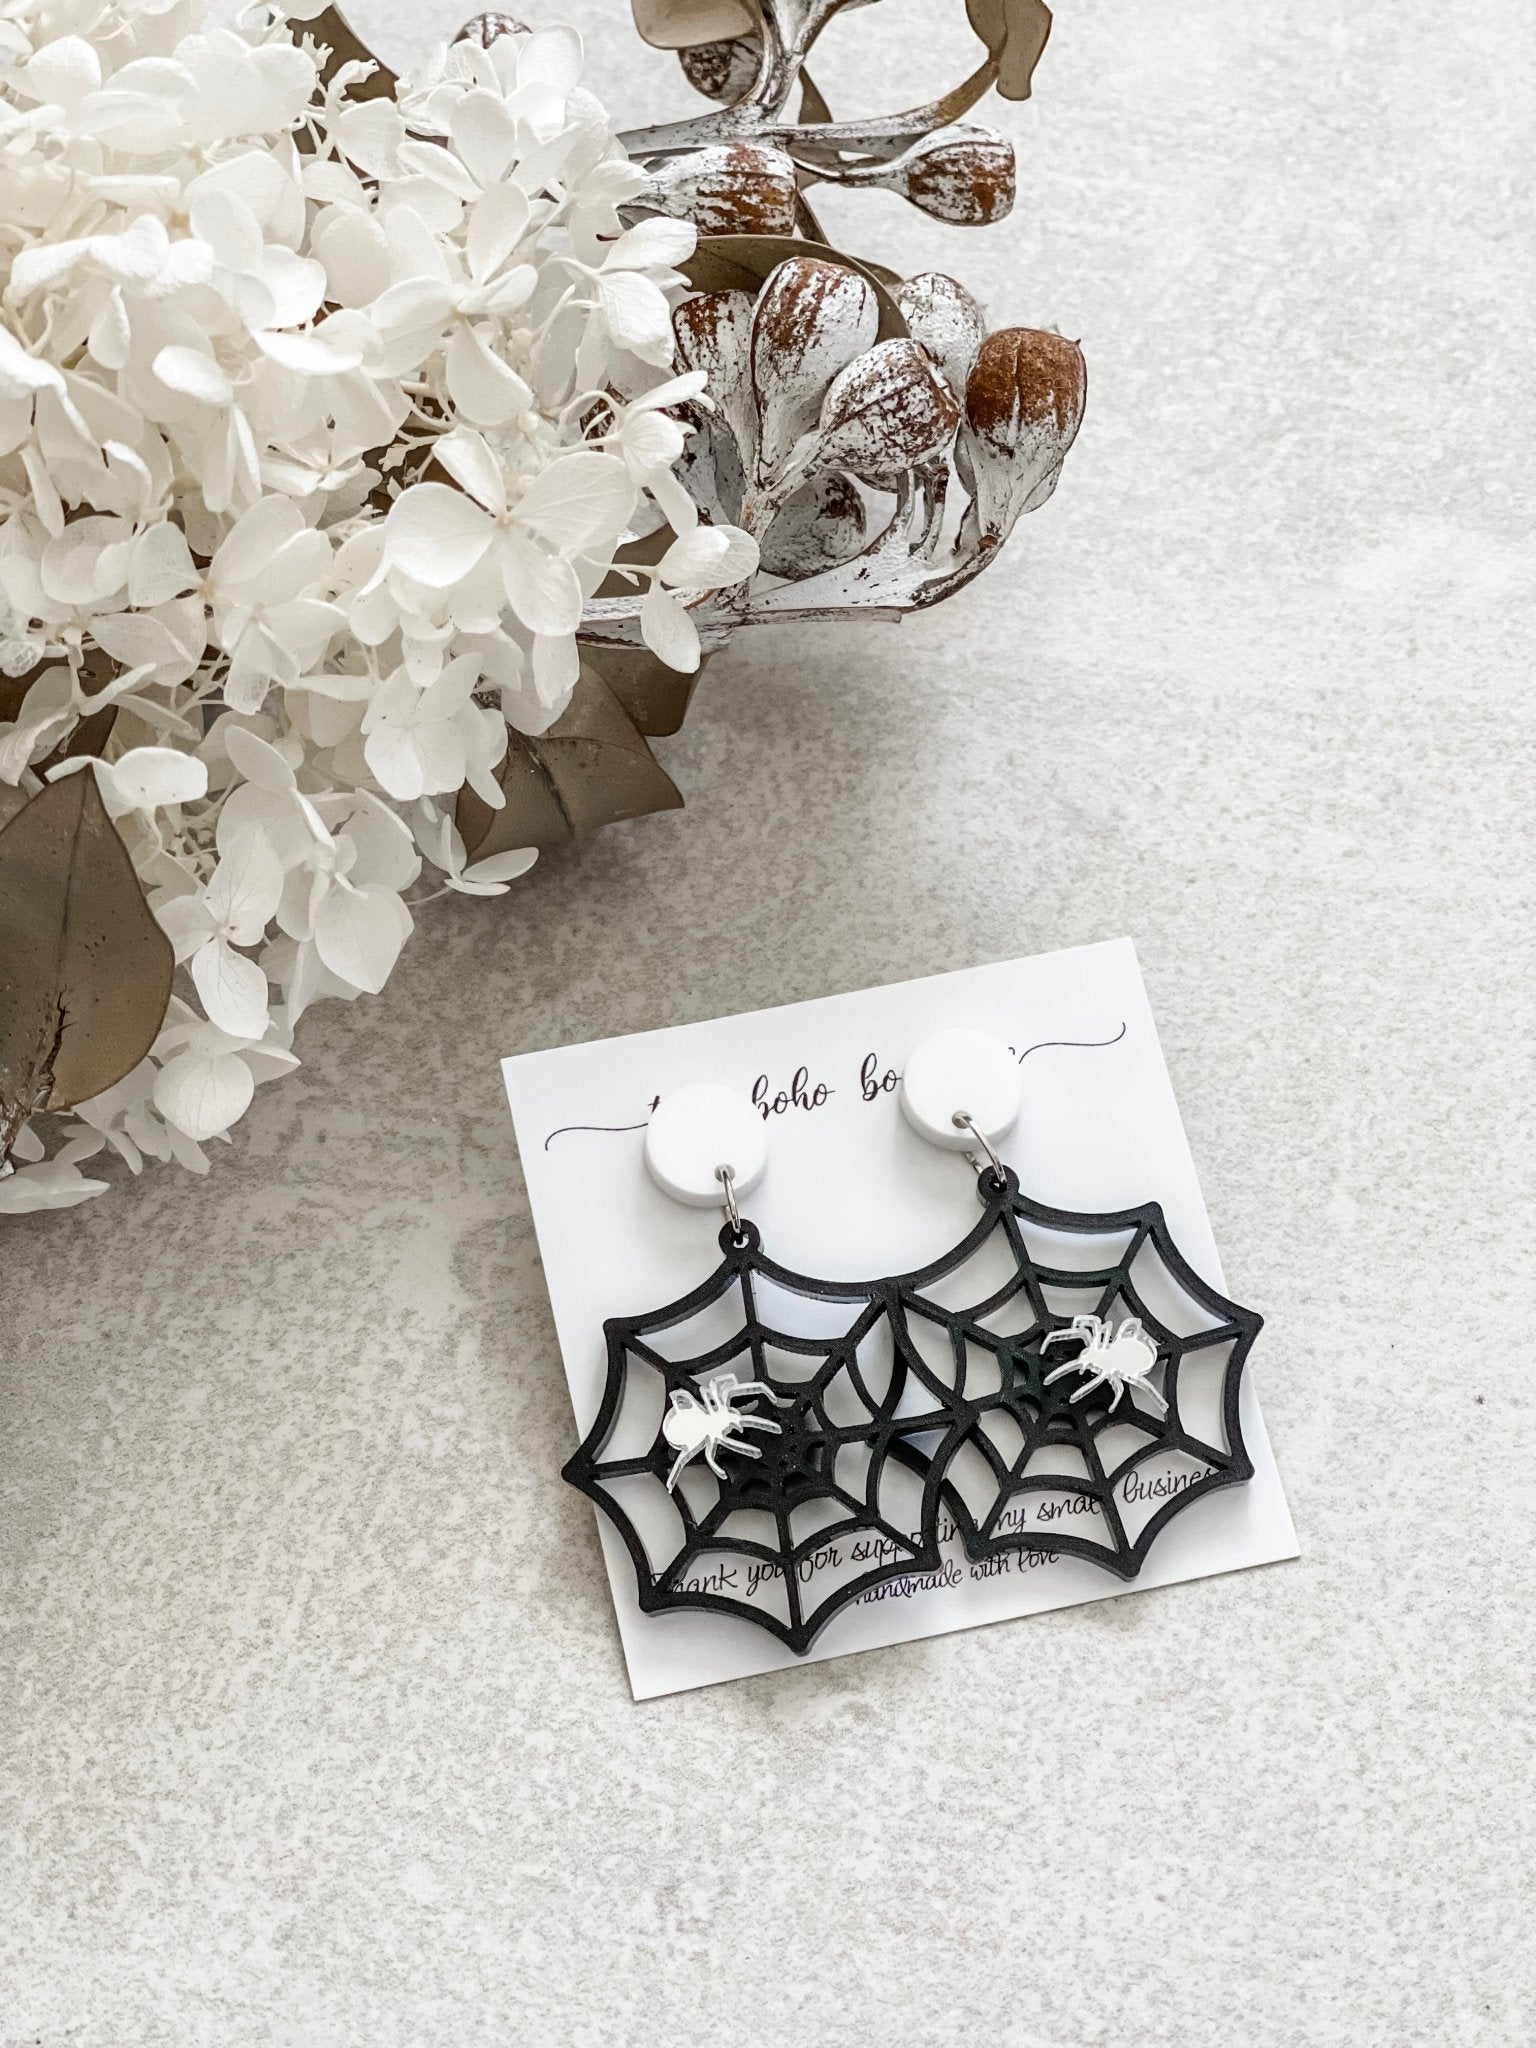 Spider Web Earrings - The Humble Gift Co.